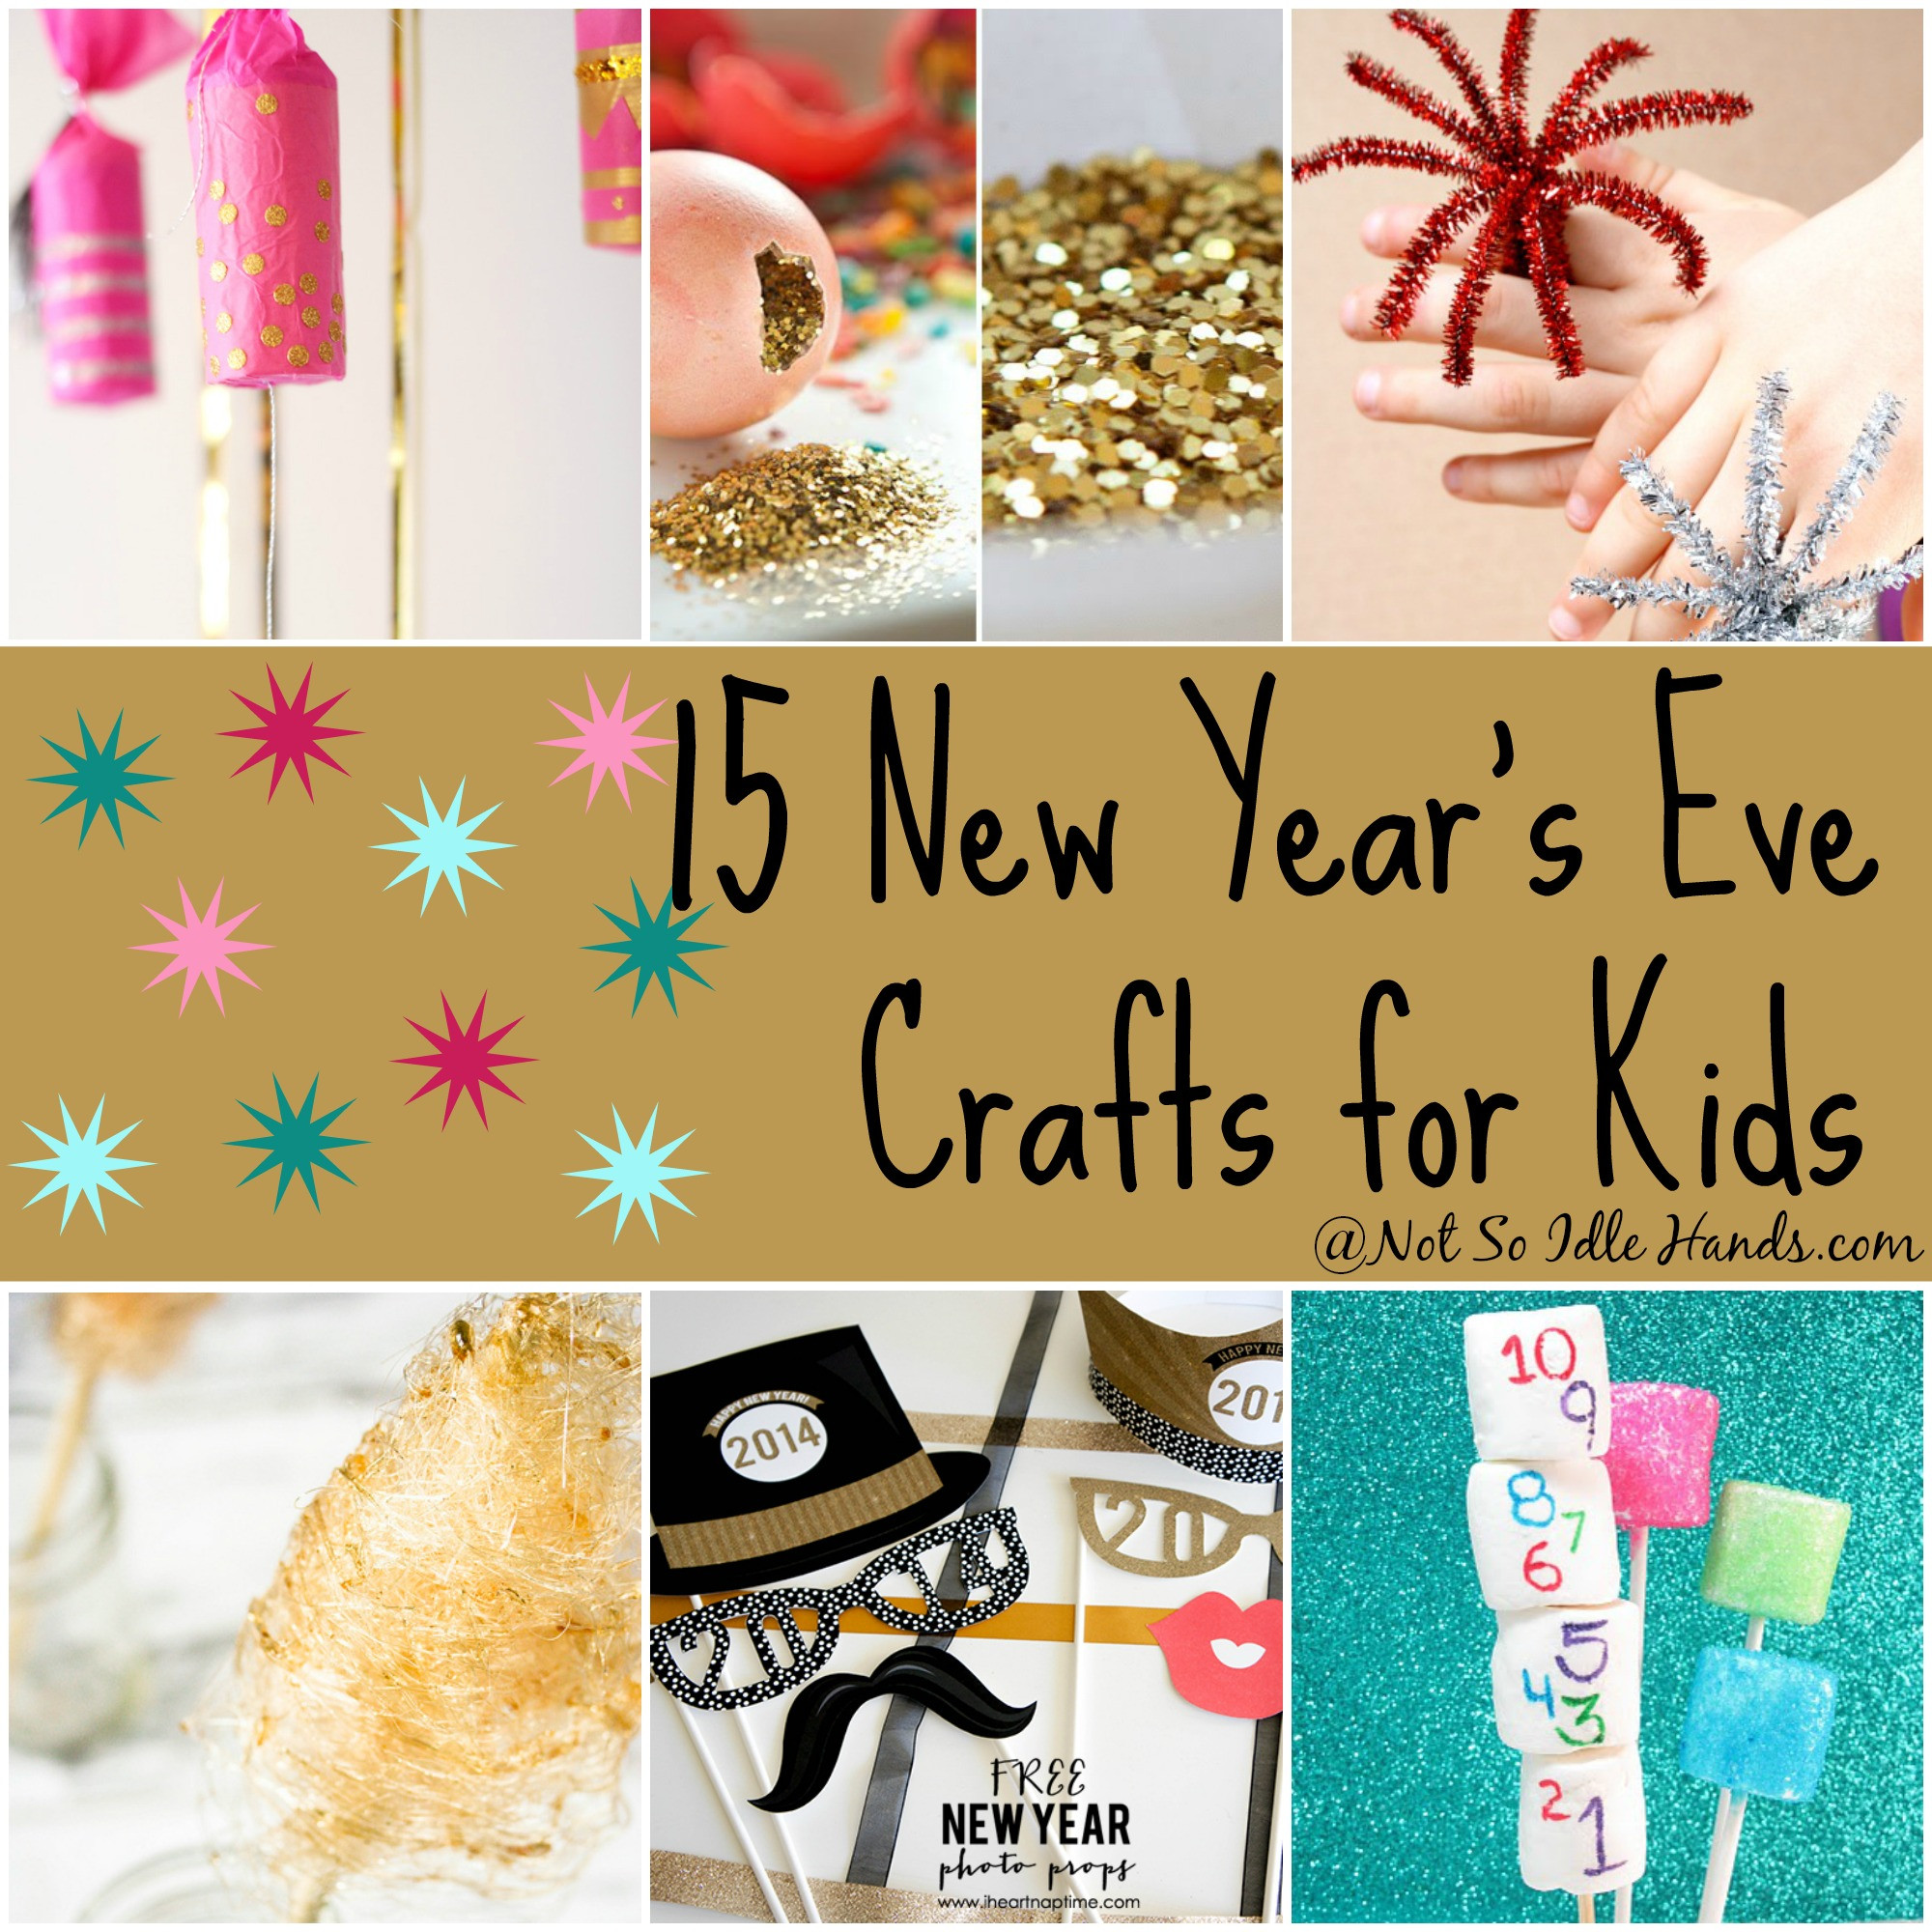 New Year Crafts For Toddlers
 15 New Year’s Crafts and Activities For Kids